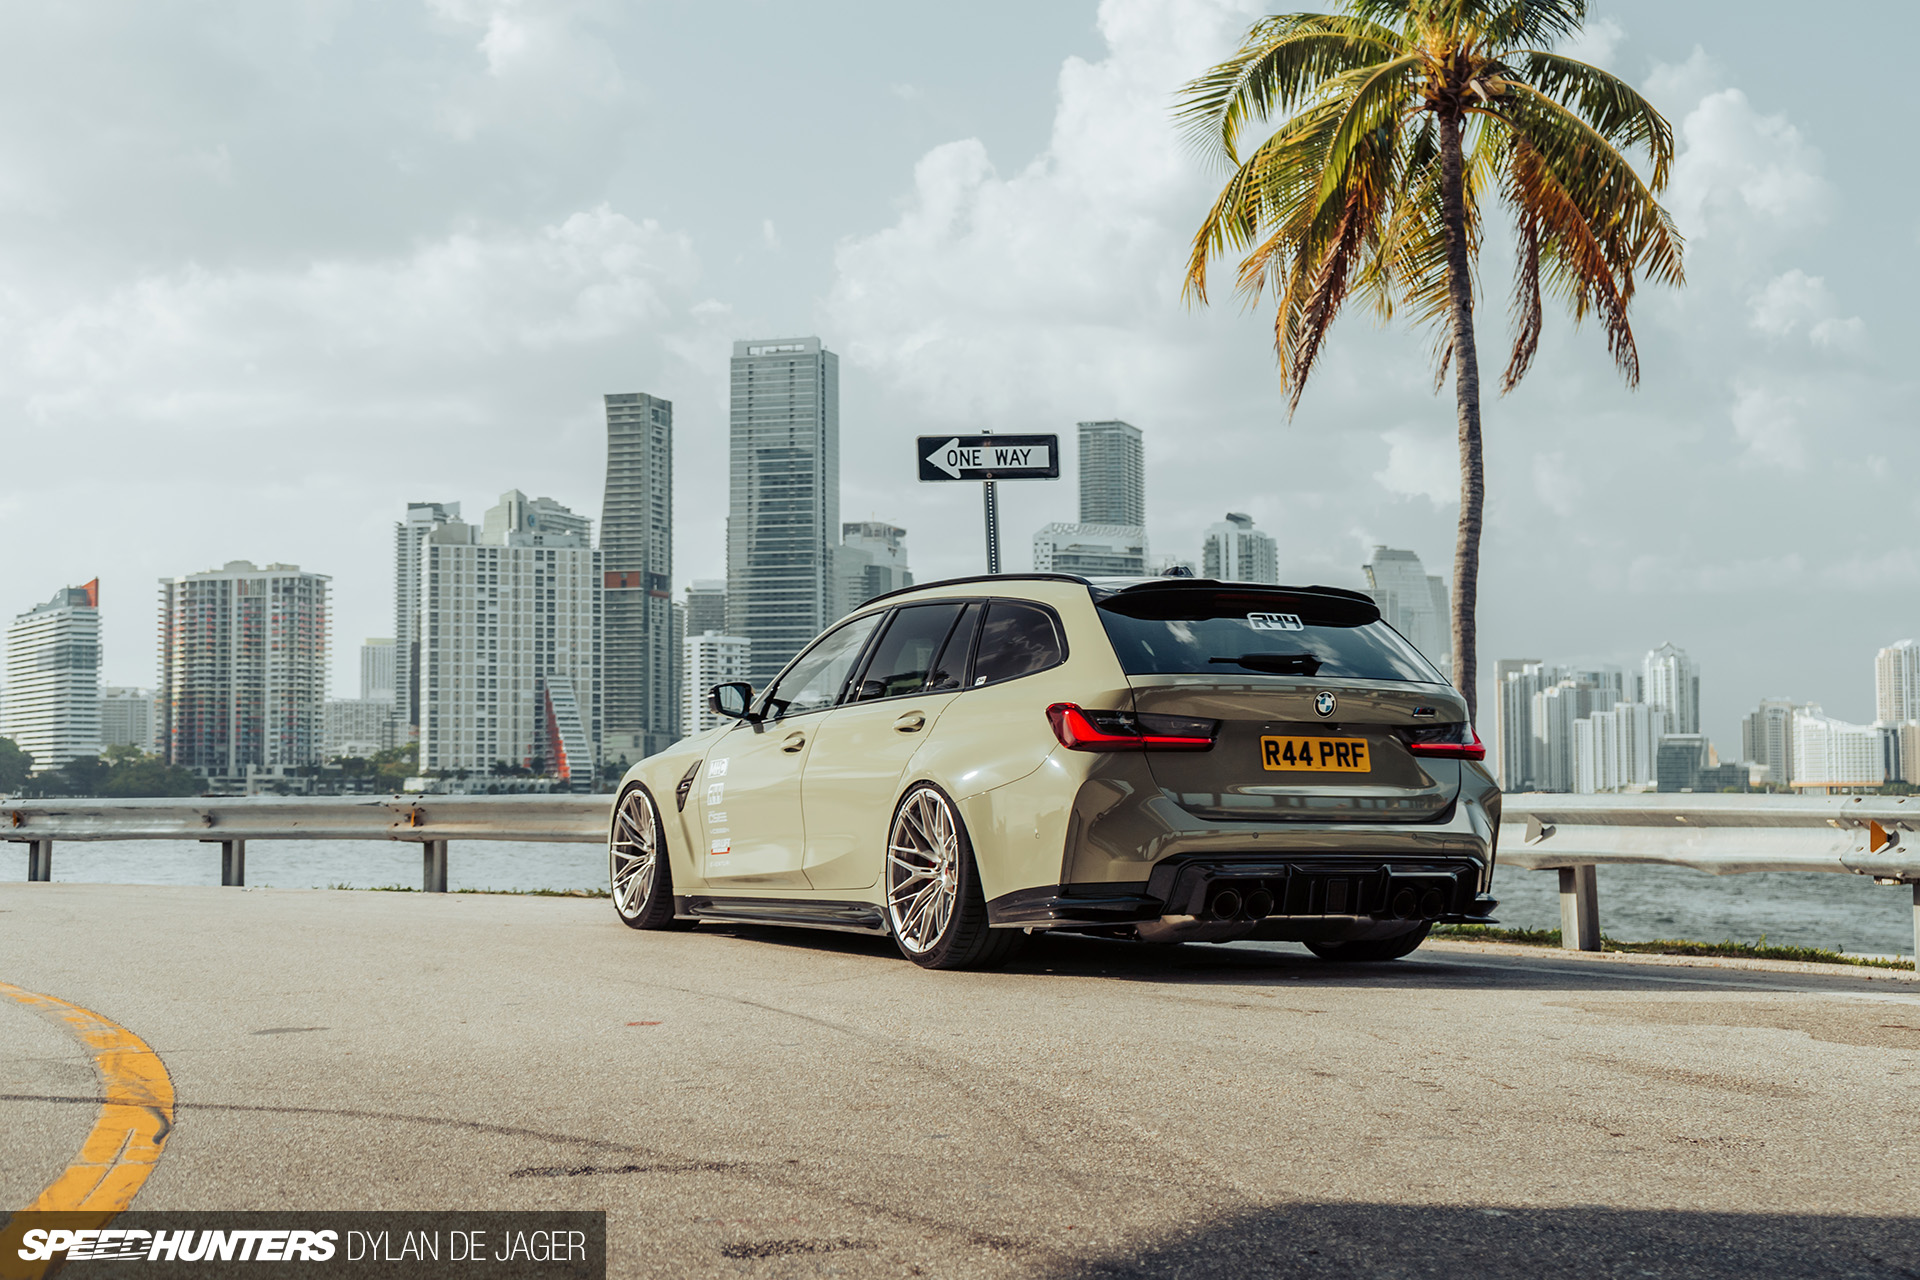 Don't Miss the Boat: Why You Should Buy an E60 M5